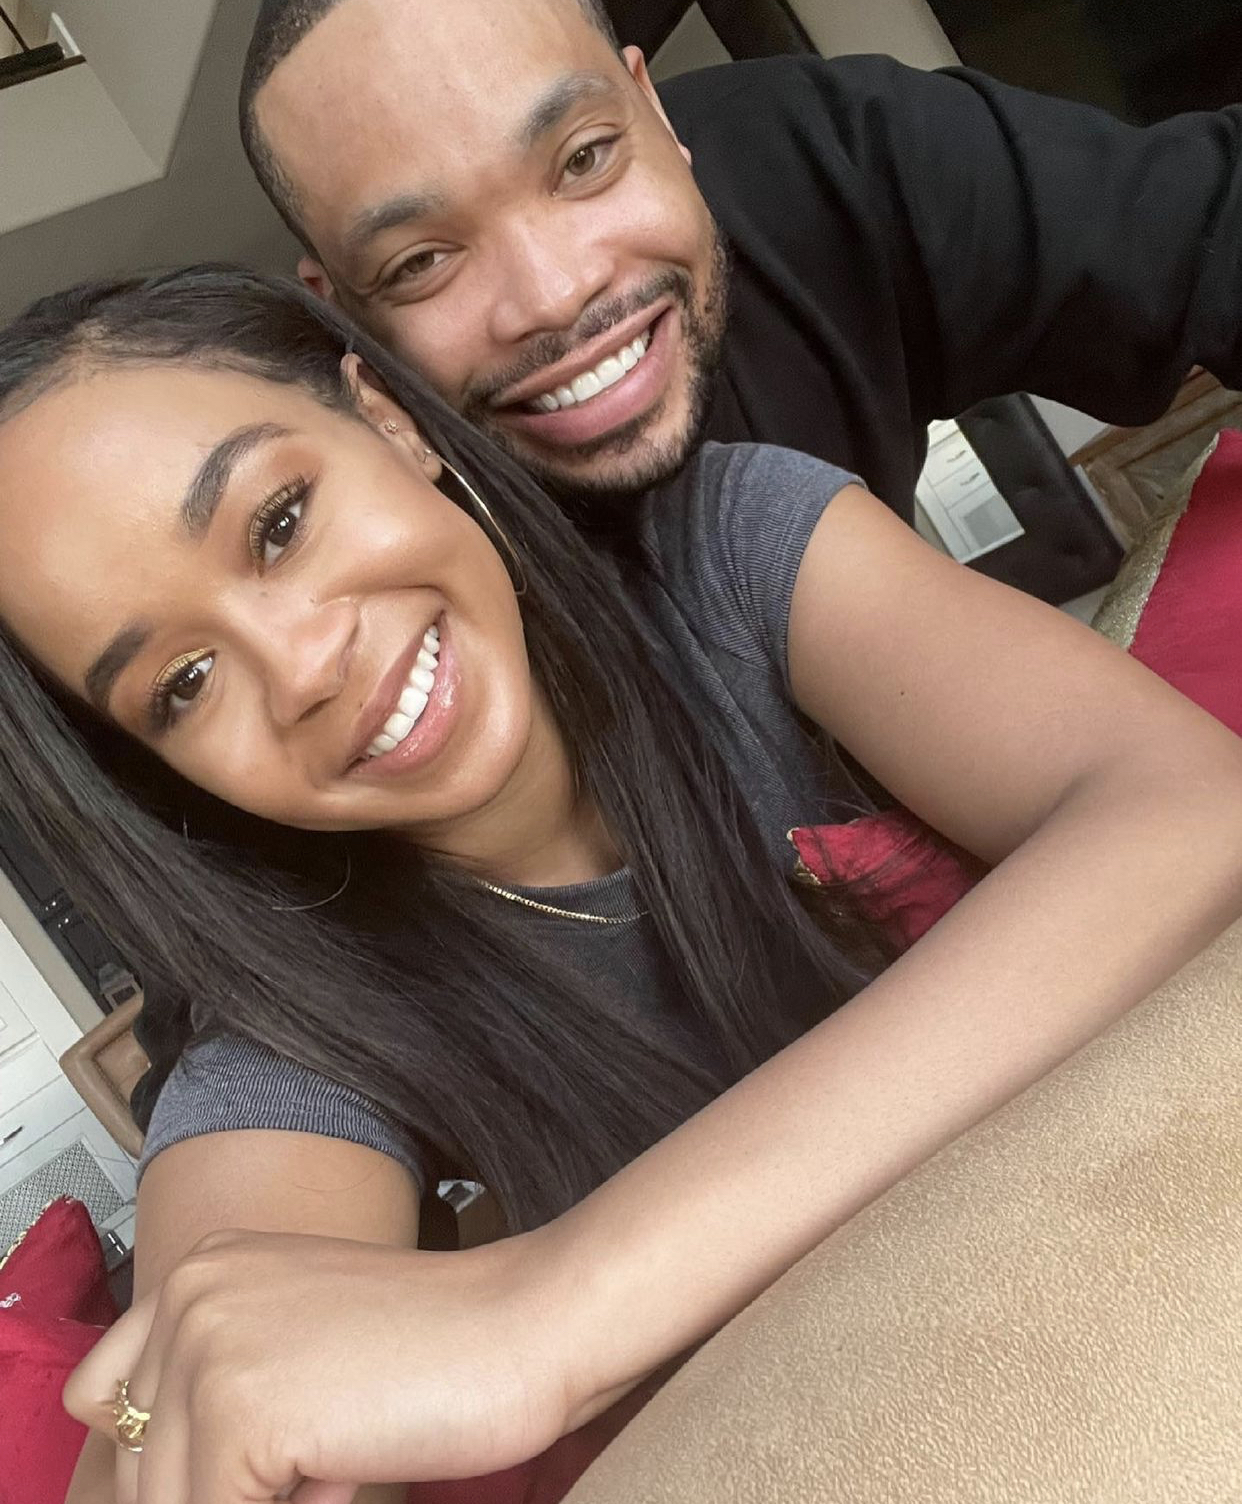 Eric, The Son Of Eddie Murphy is dating Jasmin the daughter of Martin Lawrence, and we are excited